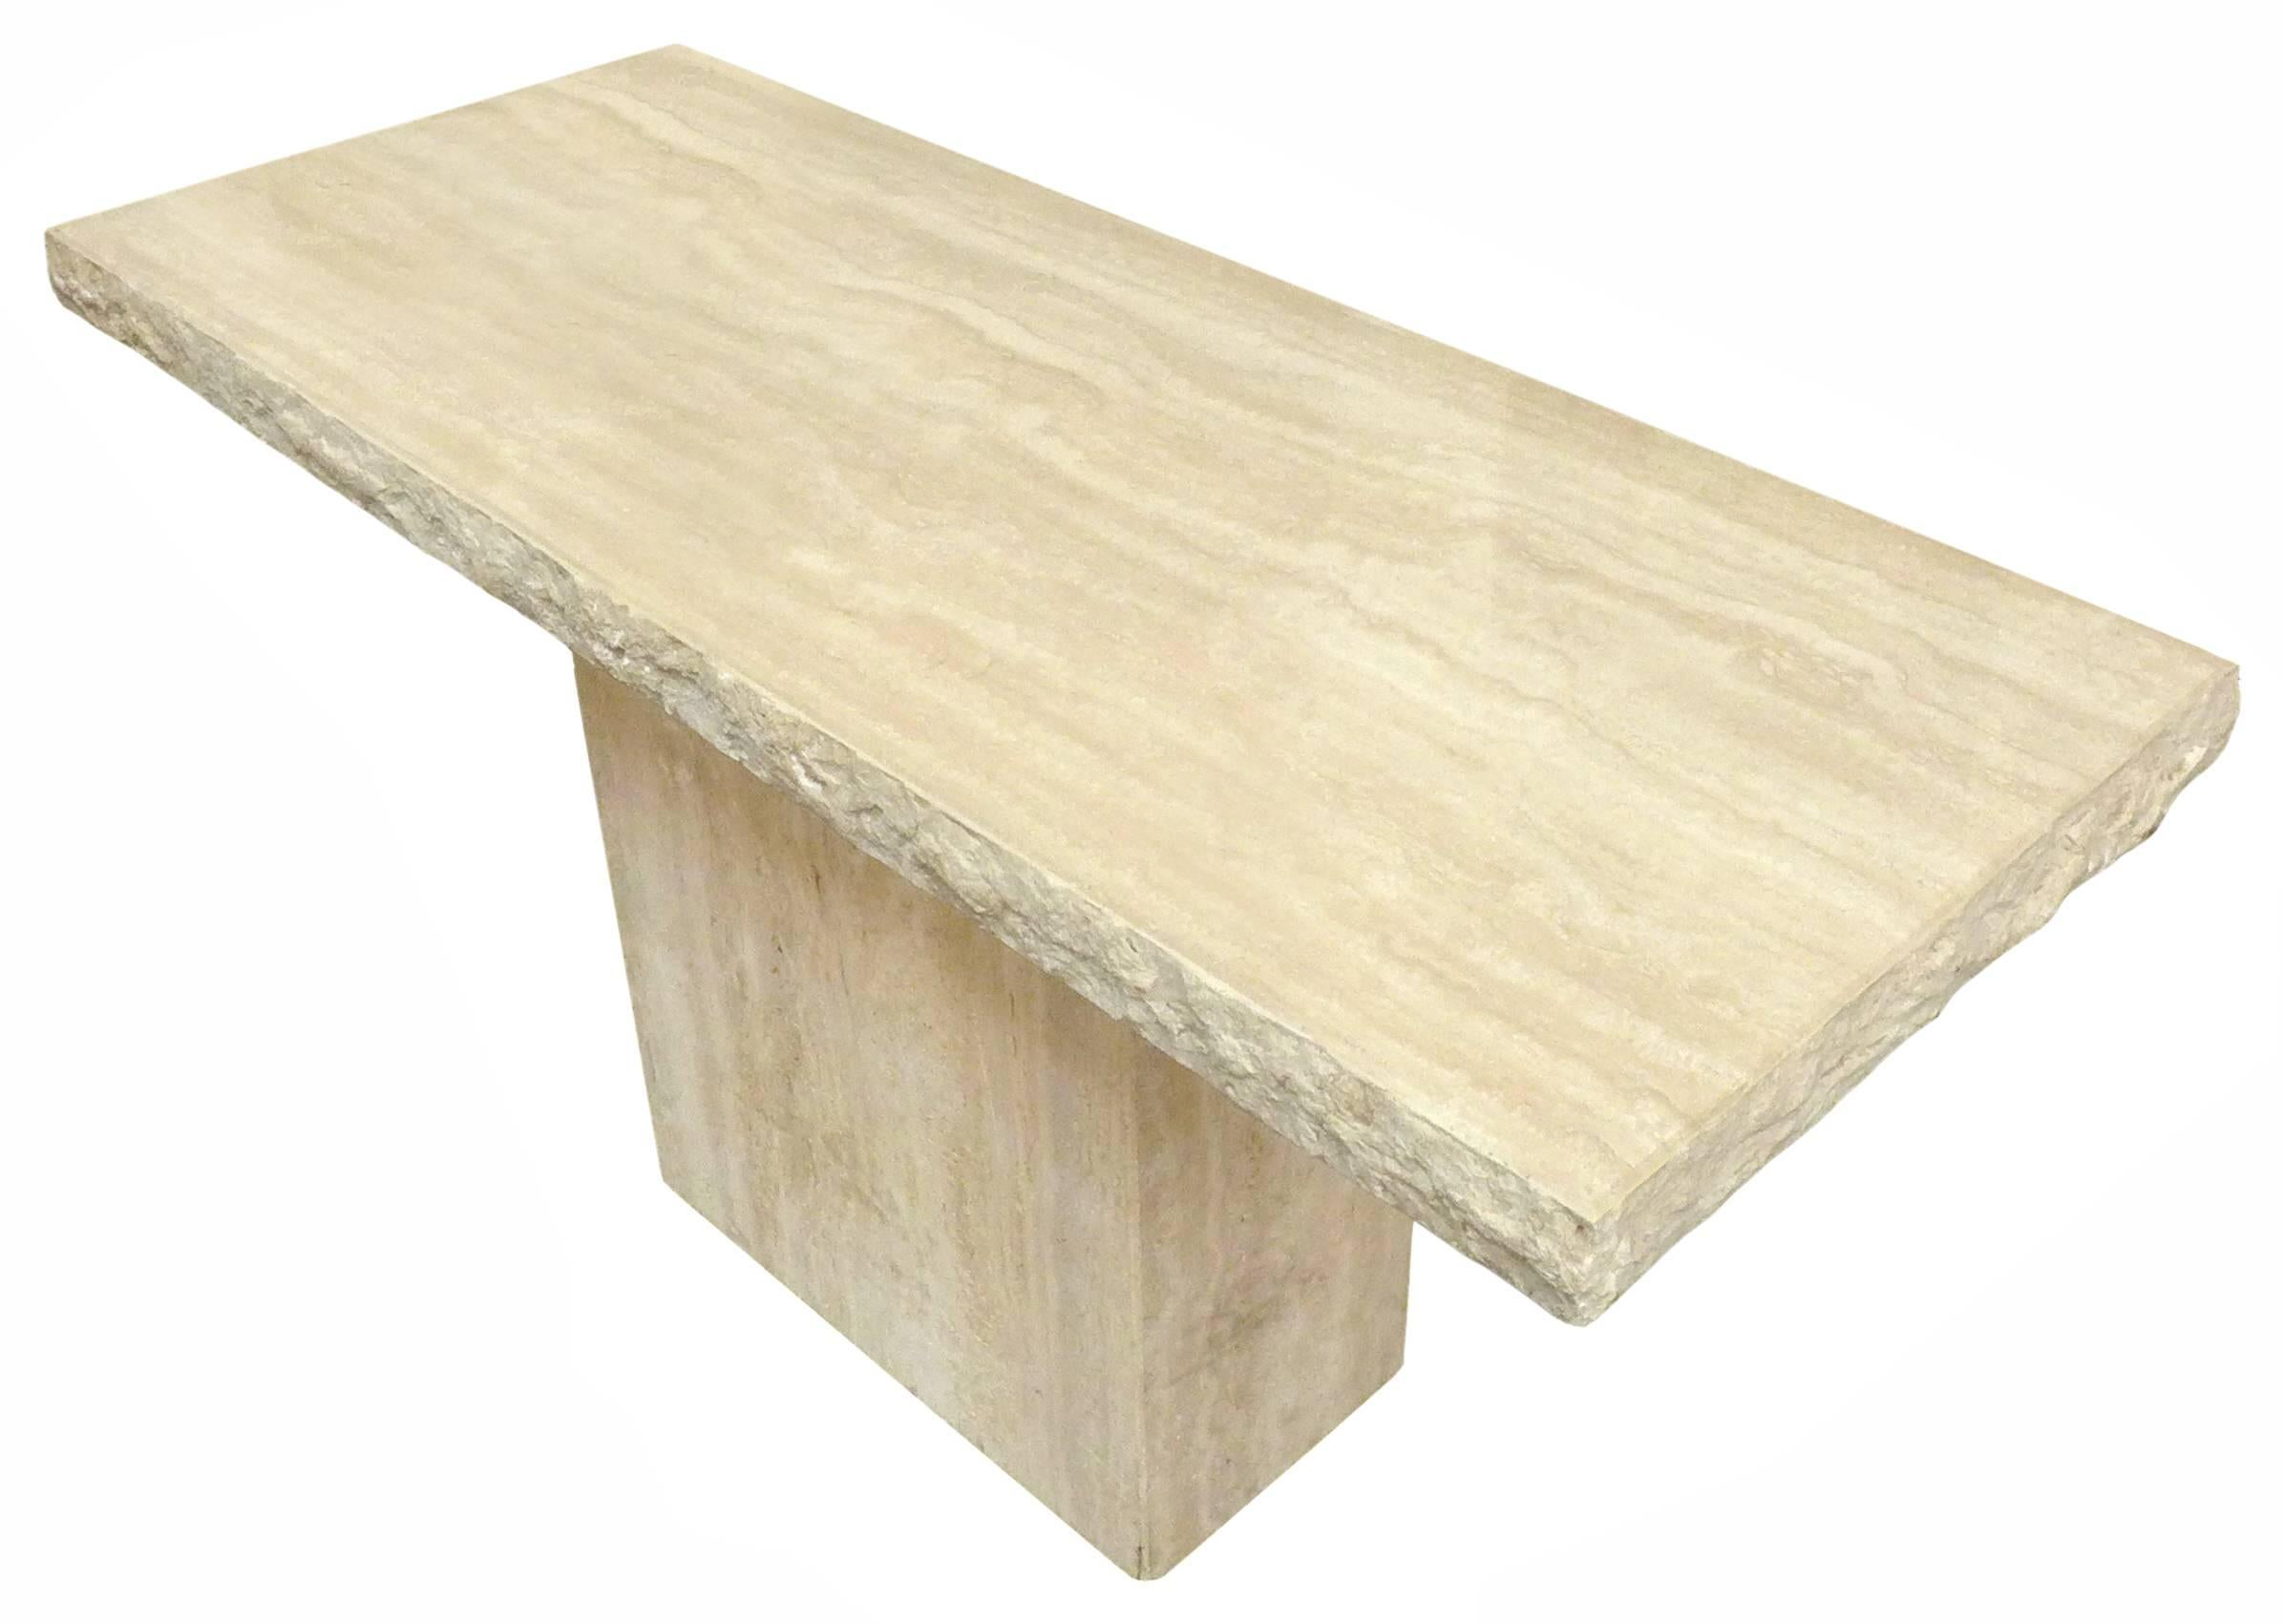 A fantastic and massive travertine console table with beautiful, rough-hewn edge detail. Classic, polished travertine grain and oatmeal hue. A wonderfully simple and powerful utilitarian piece.